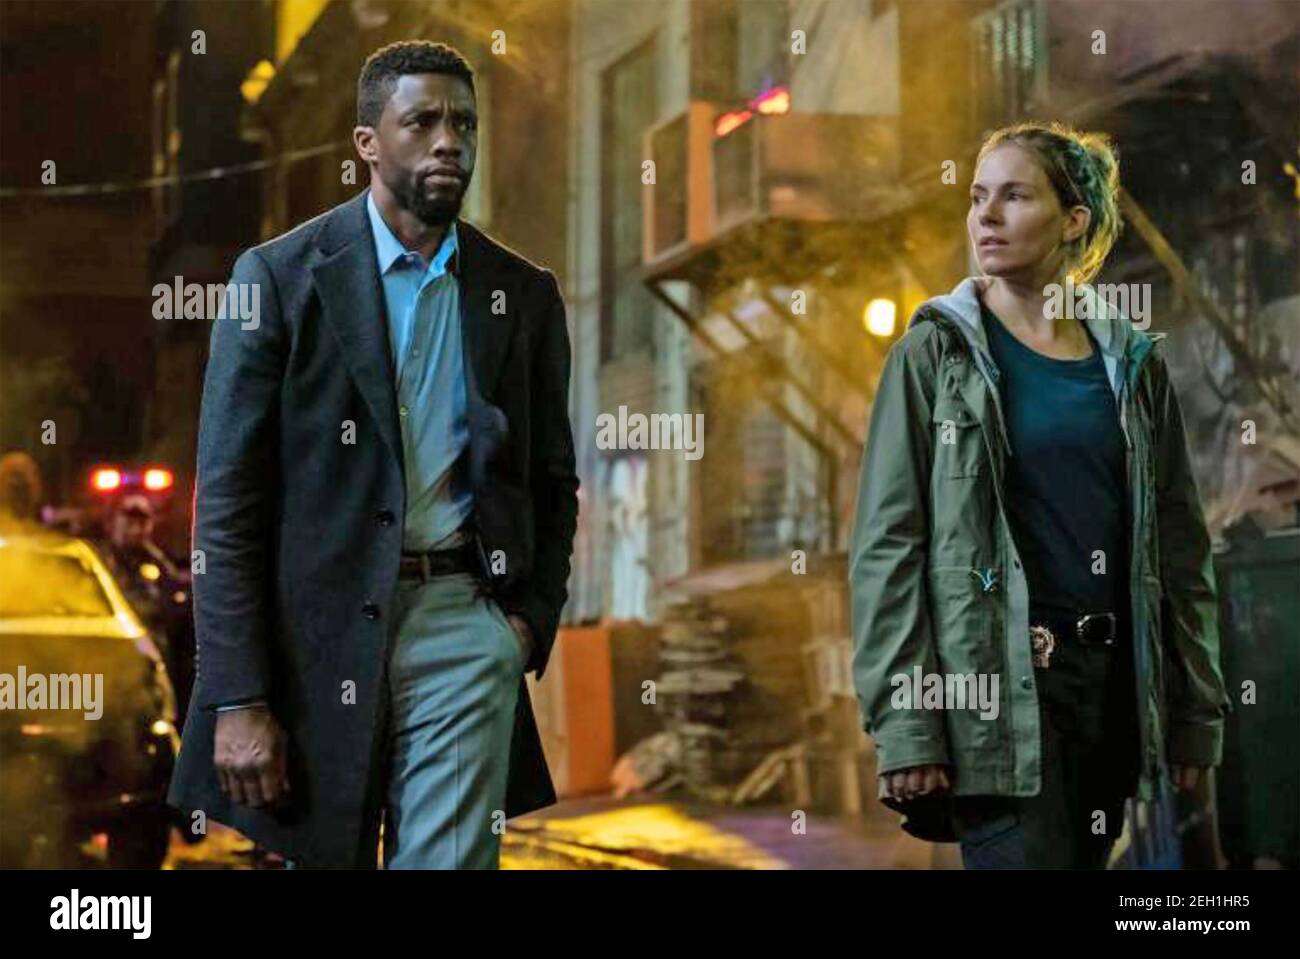 21 BRIDGES 2019 STXfikms production with Sienna Miller and Chadwick Boseman Stock Photo